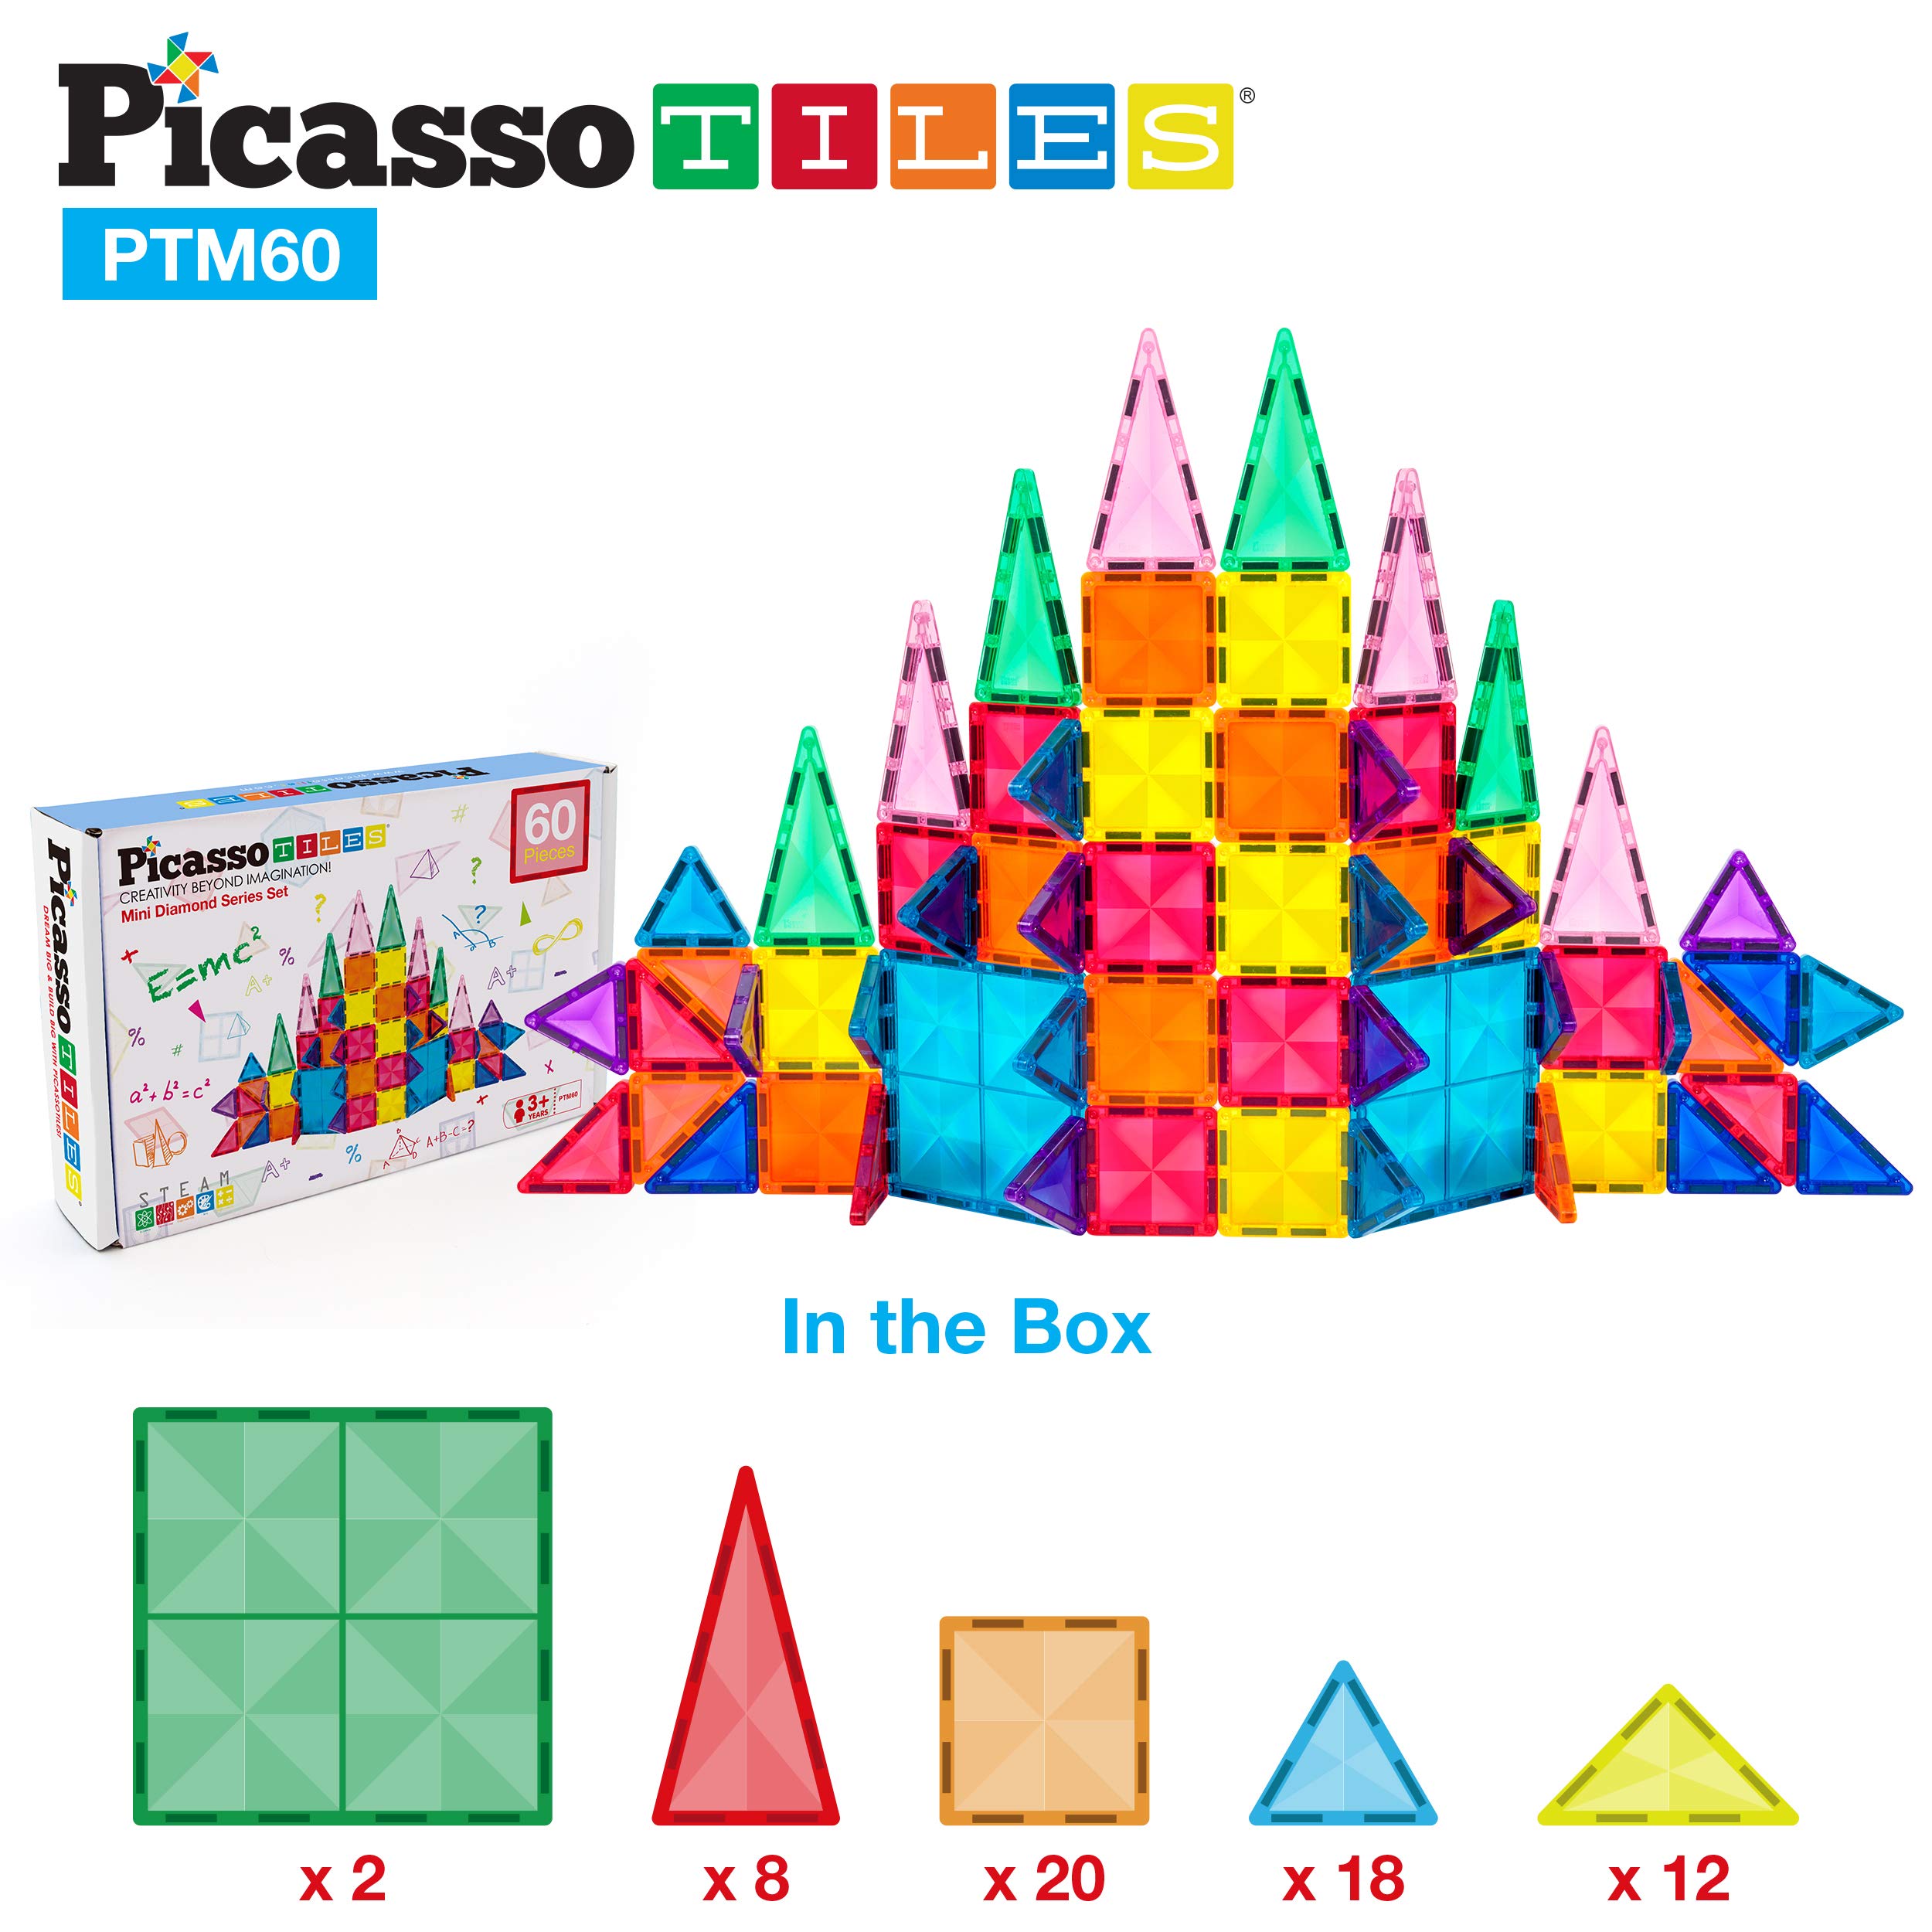 PicassoTiles 201 Piece Engineering Kit + 60 Piece Magnetic Mini Diamond Blocks, STEM Learning Toys Playset w/IdeaBook, Power Drill, Clickable Ratchet, Travel Size On-The-Go Magnet Construction Toy